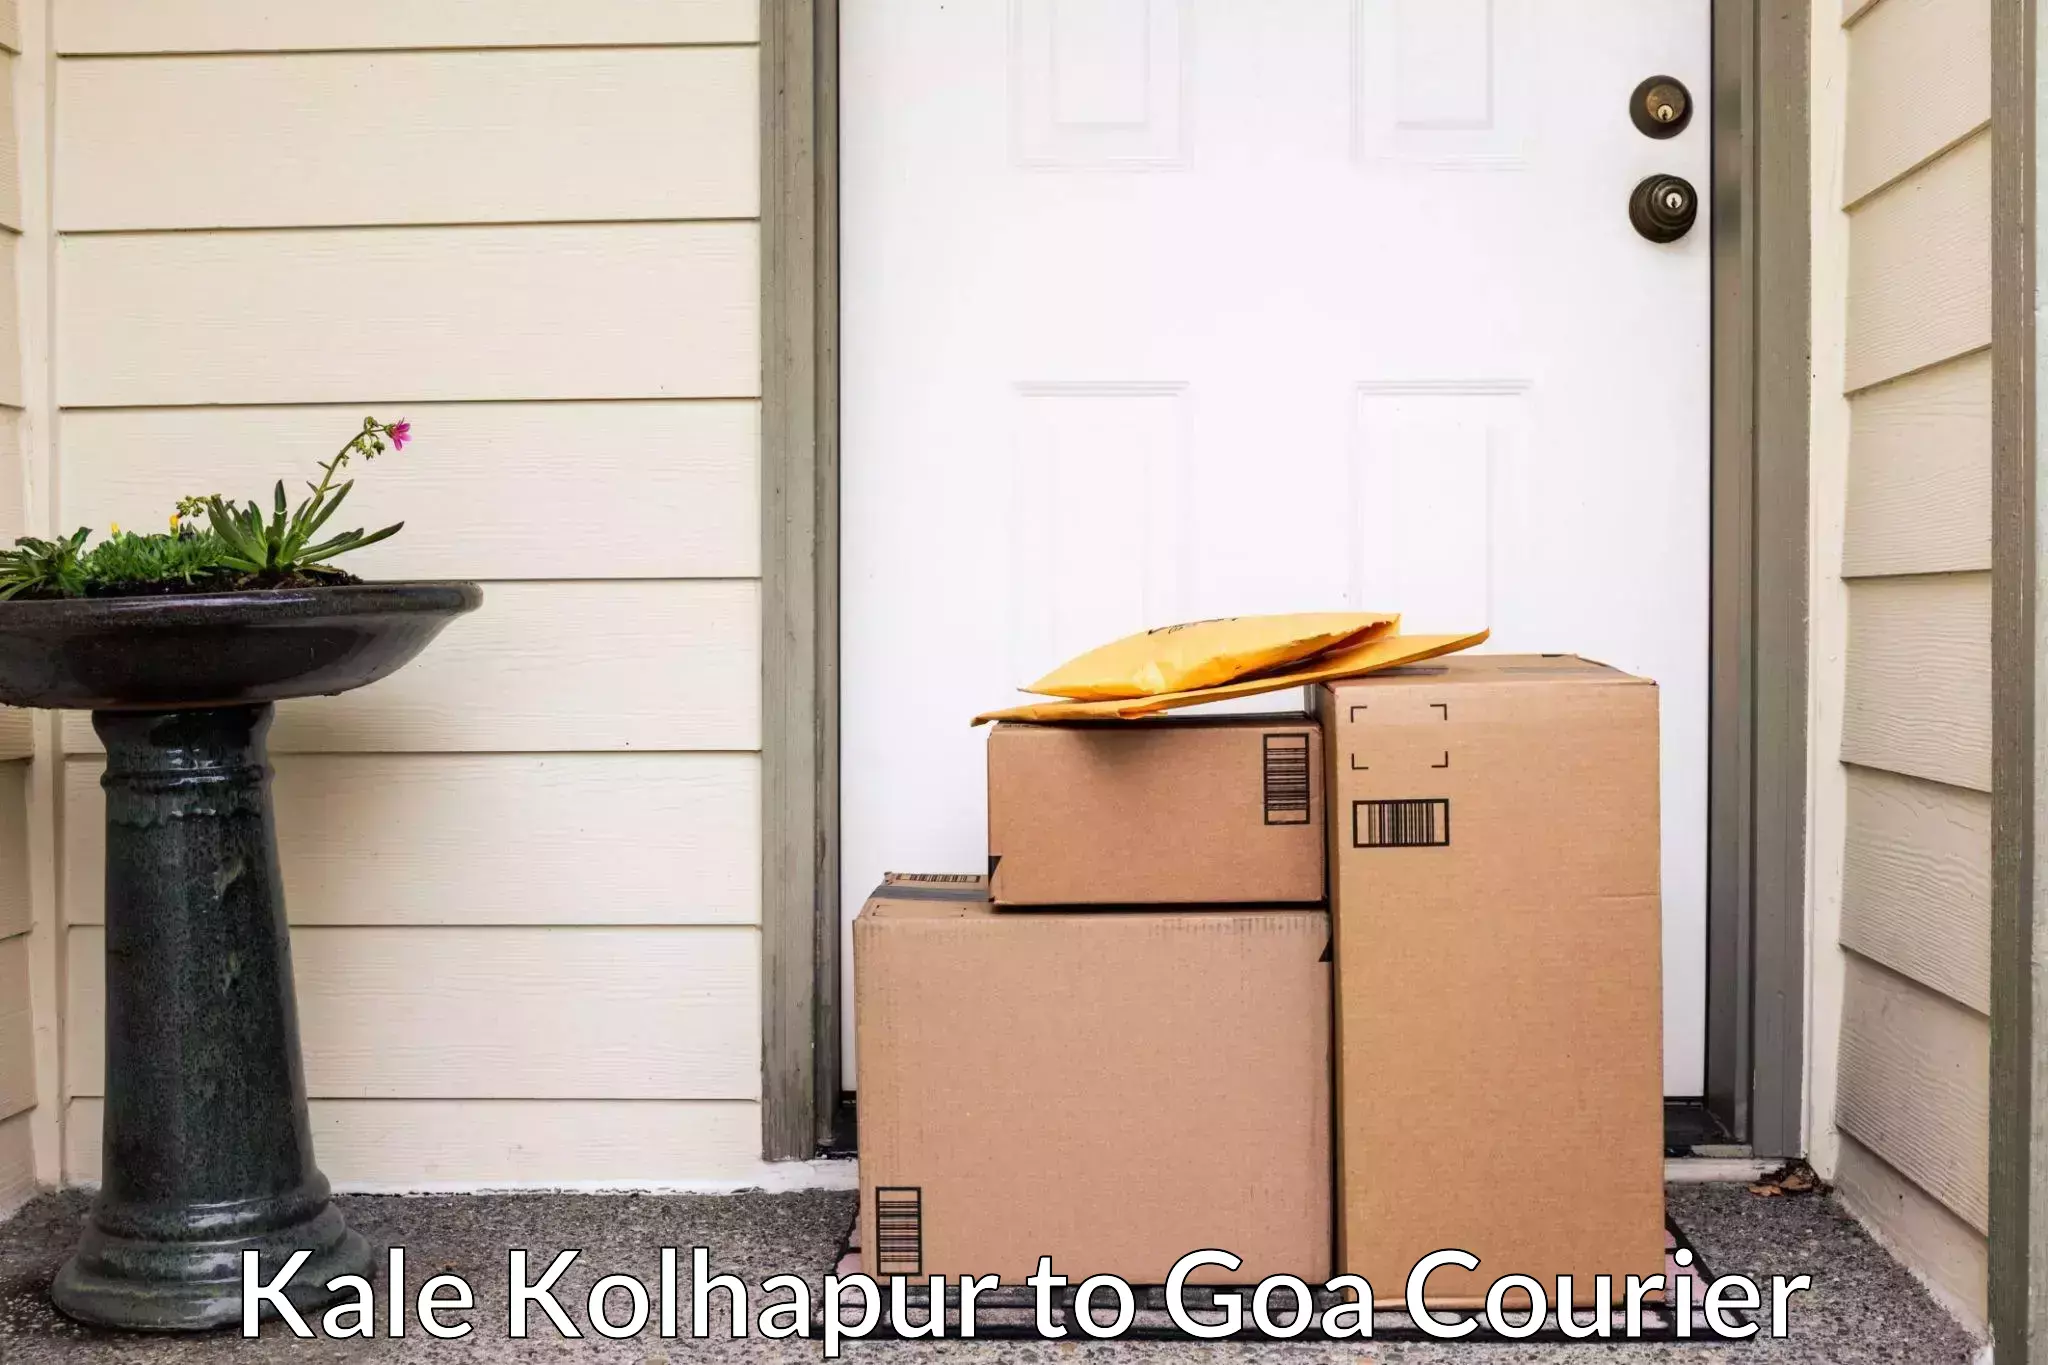 Trusted relocation experts Kale Kolhapur to Bardez